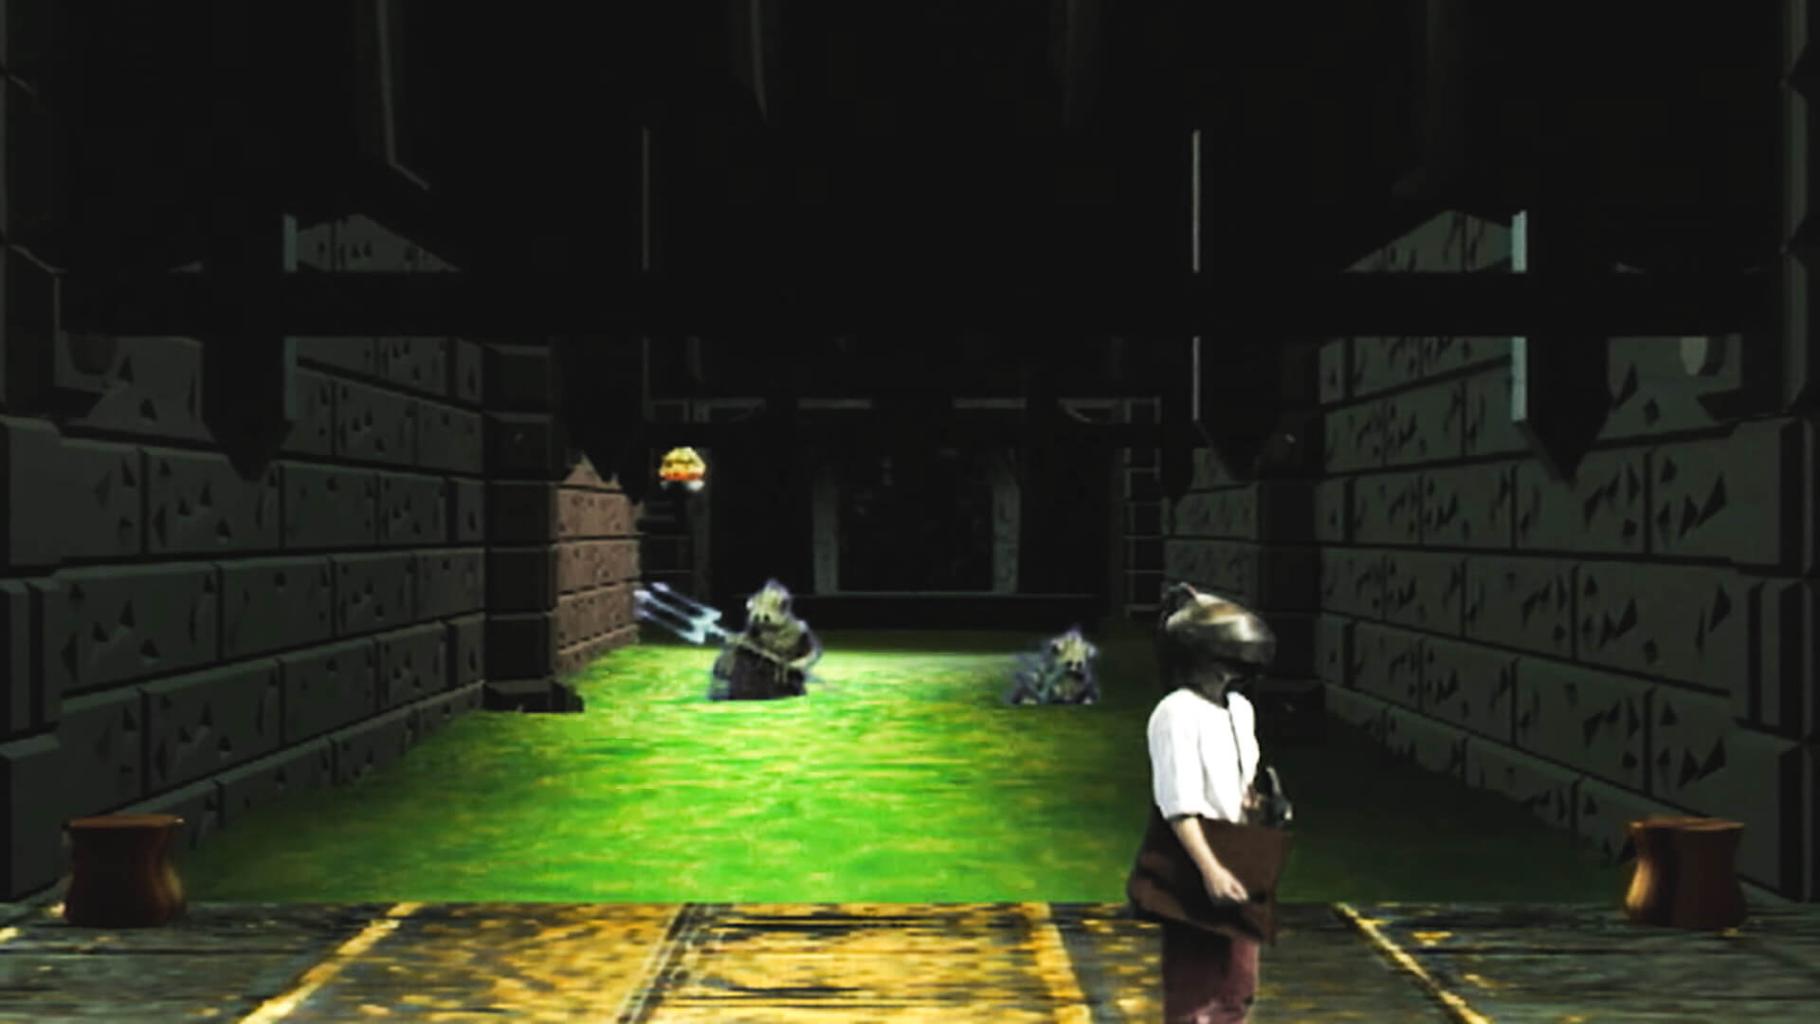 A team is pursued by miremen in the sewers. Team 5 from Series 8 of Knightmare (1994).